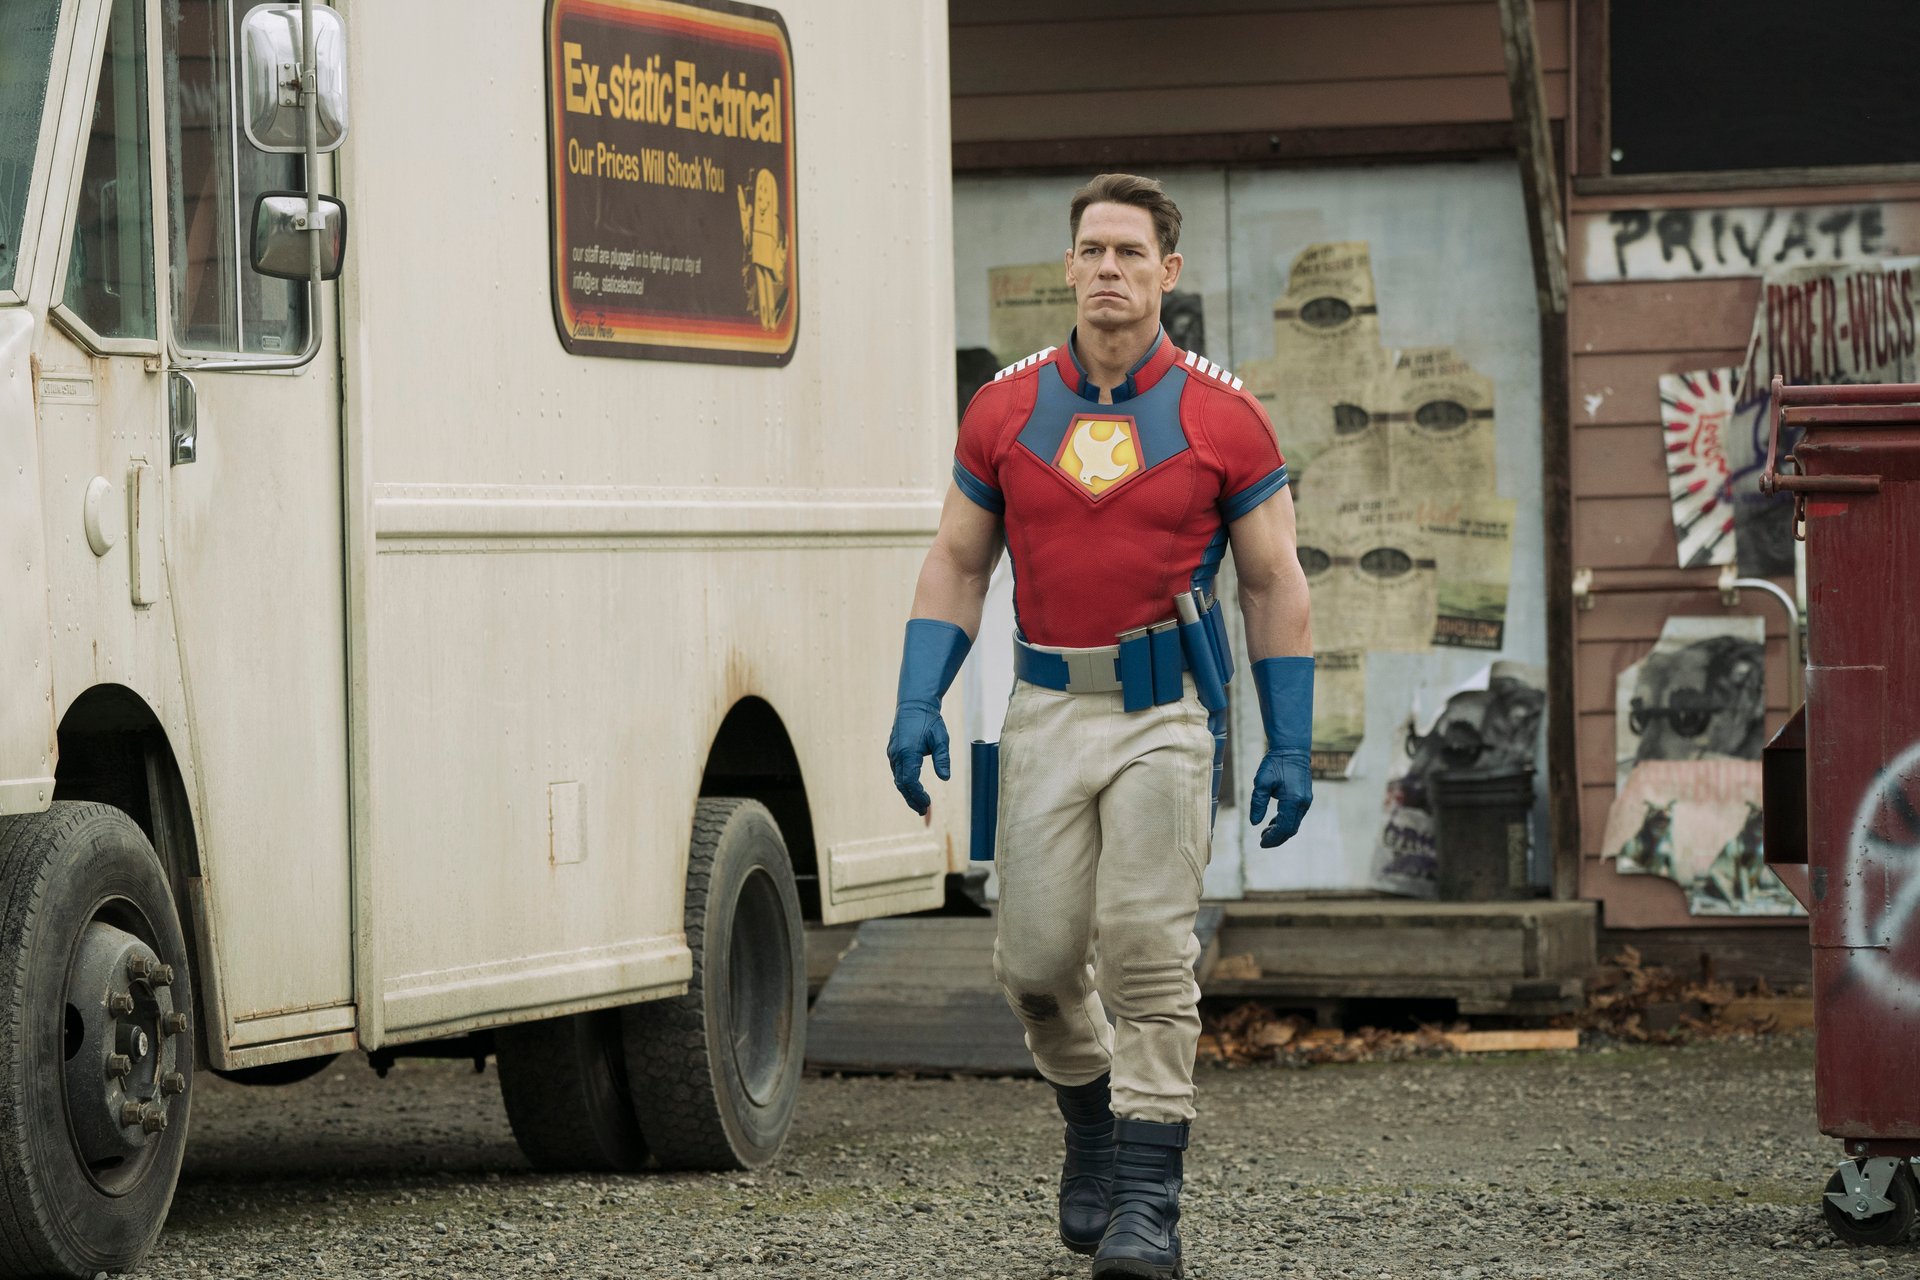 John Cena, who will return as Christopher Smith in ‘Peacemaker’ Season 2, in costume walking next to a large white truck, and he's wearing beige pants, a red shirt, and blue gloves.